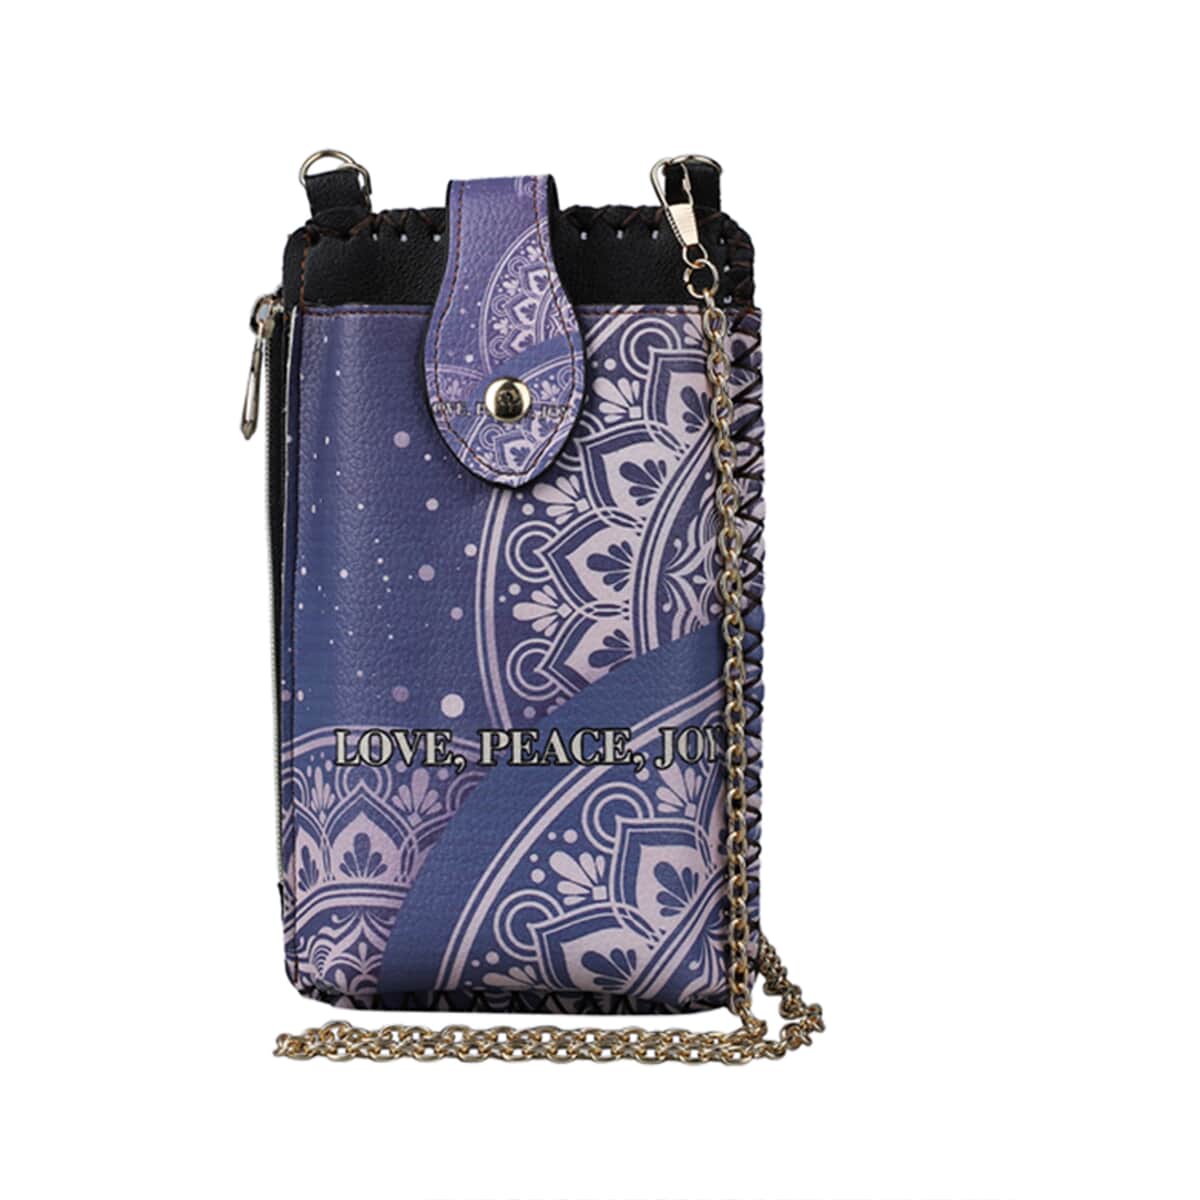 Navy Bohemian Pattern Faux Leather Cell Phone Bag (4.13"x7.09") with Shoulder Strap image number 0